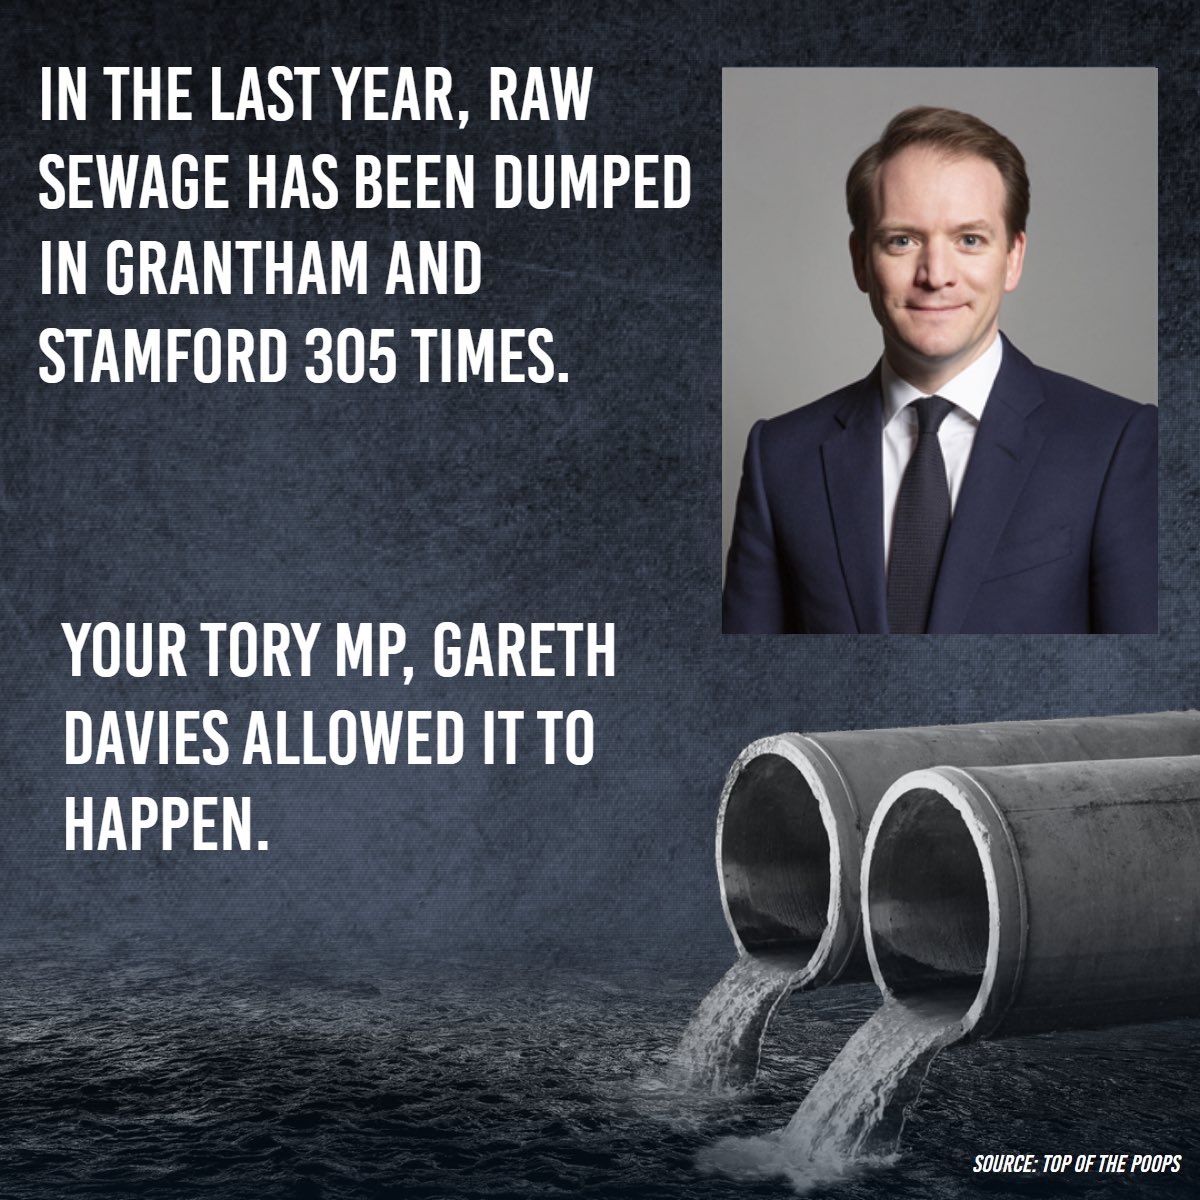 Do not vote for this #Tory sewage 
#ToriesOut #Sunackered